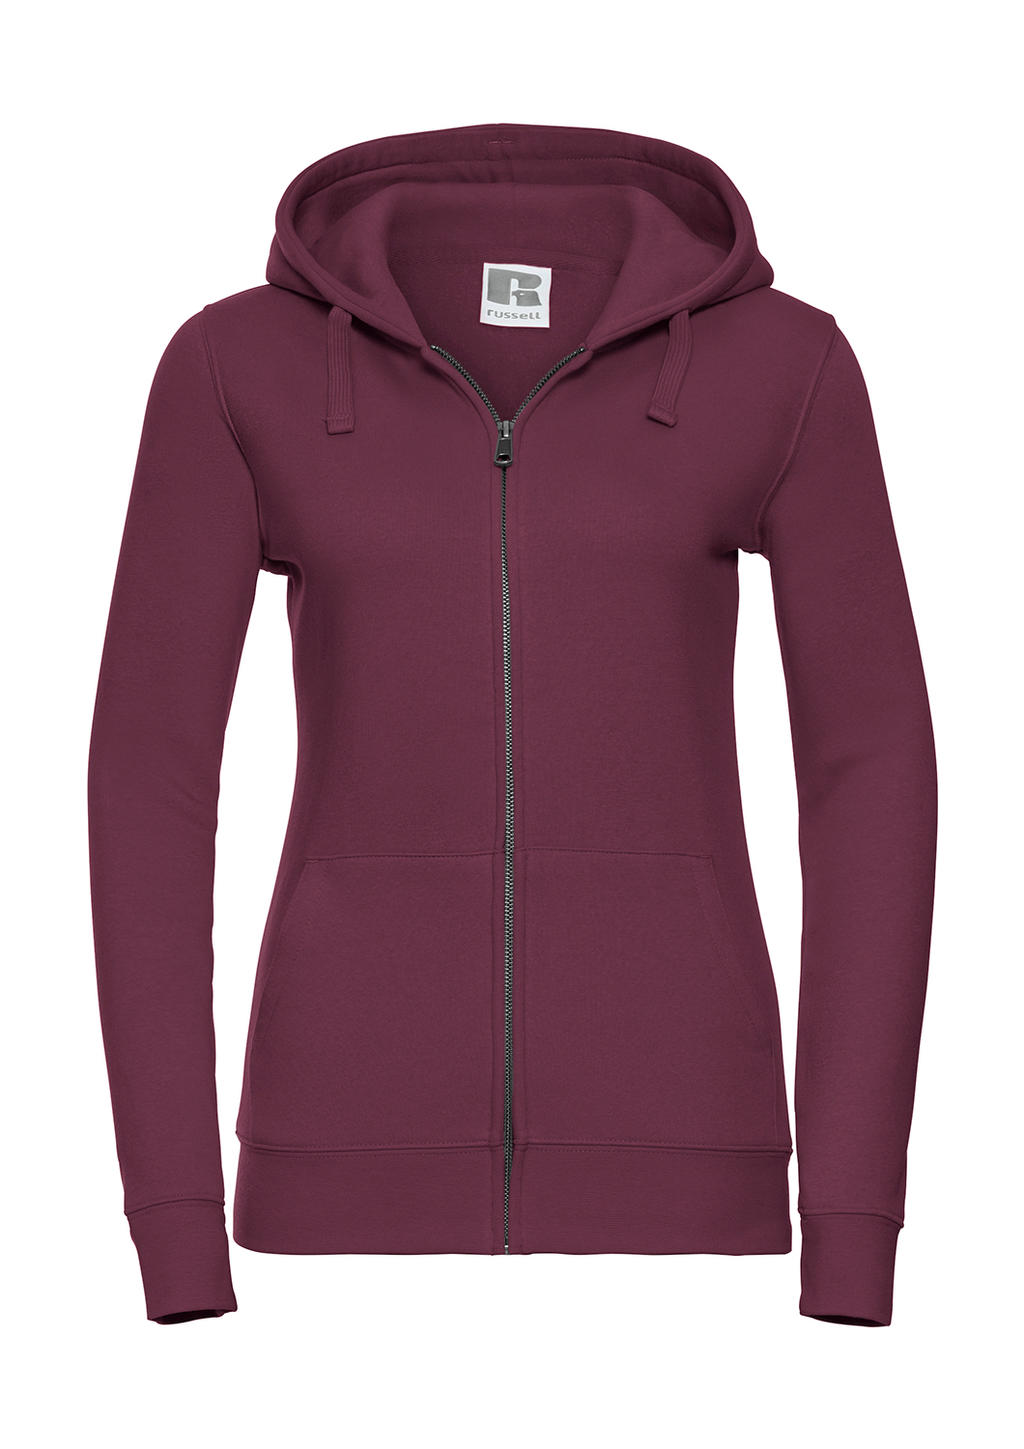  Ladies Authentic Zipped Hood in Farbe Burgundy